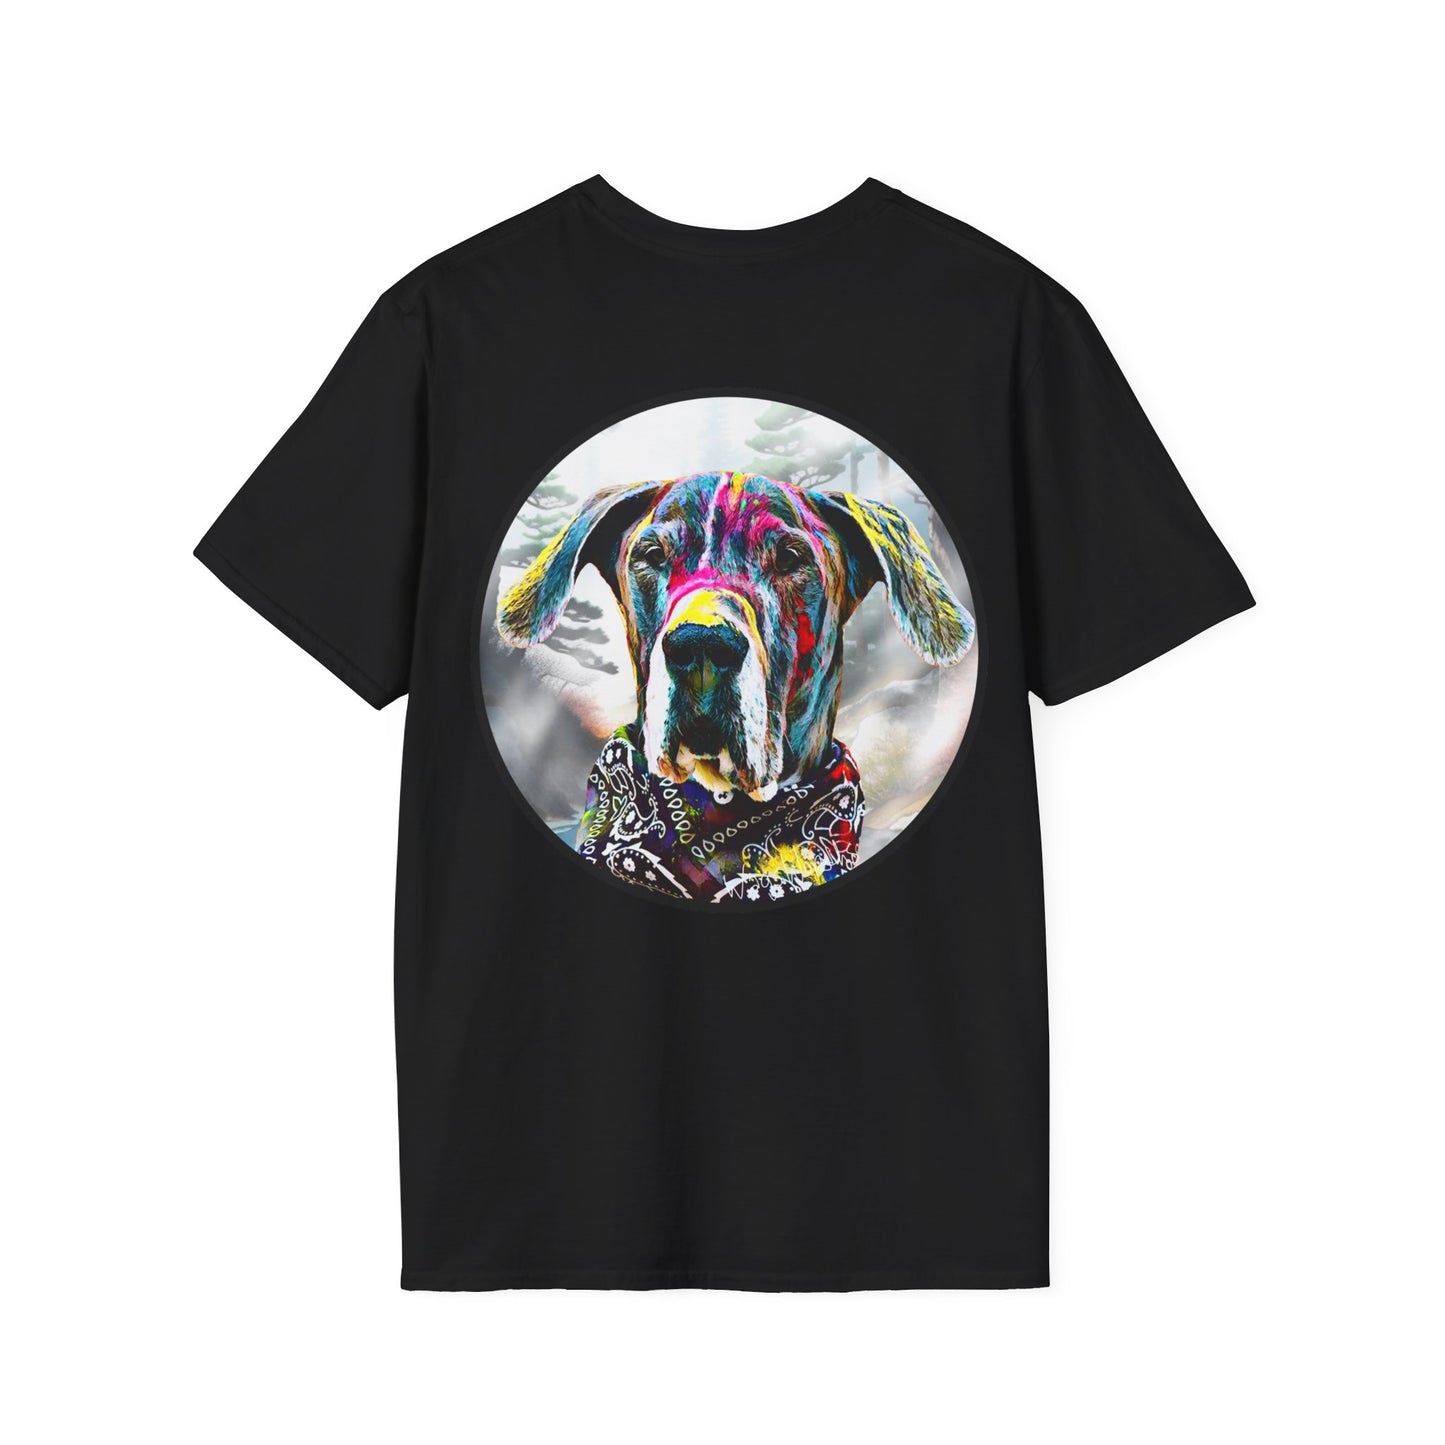 Luckas in Oil Graphic Tee